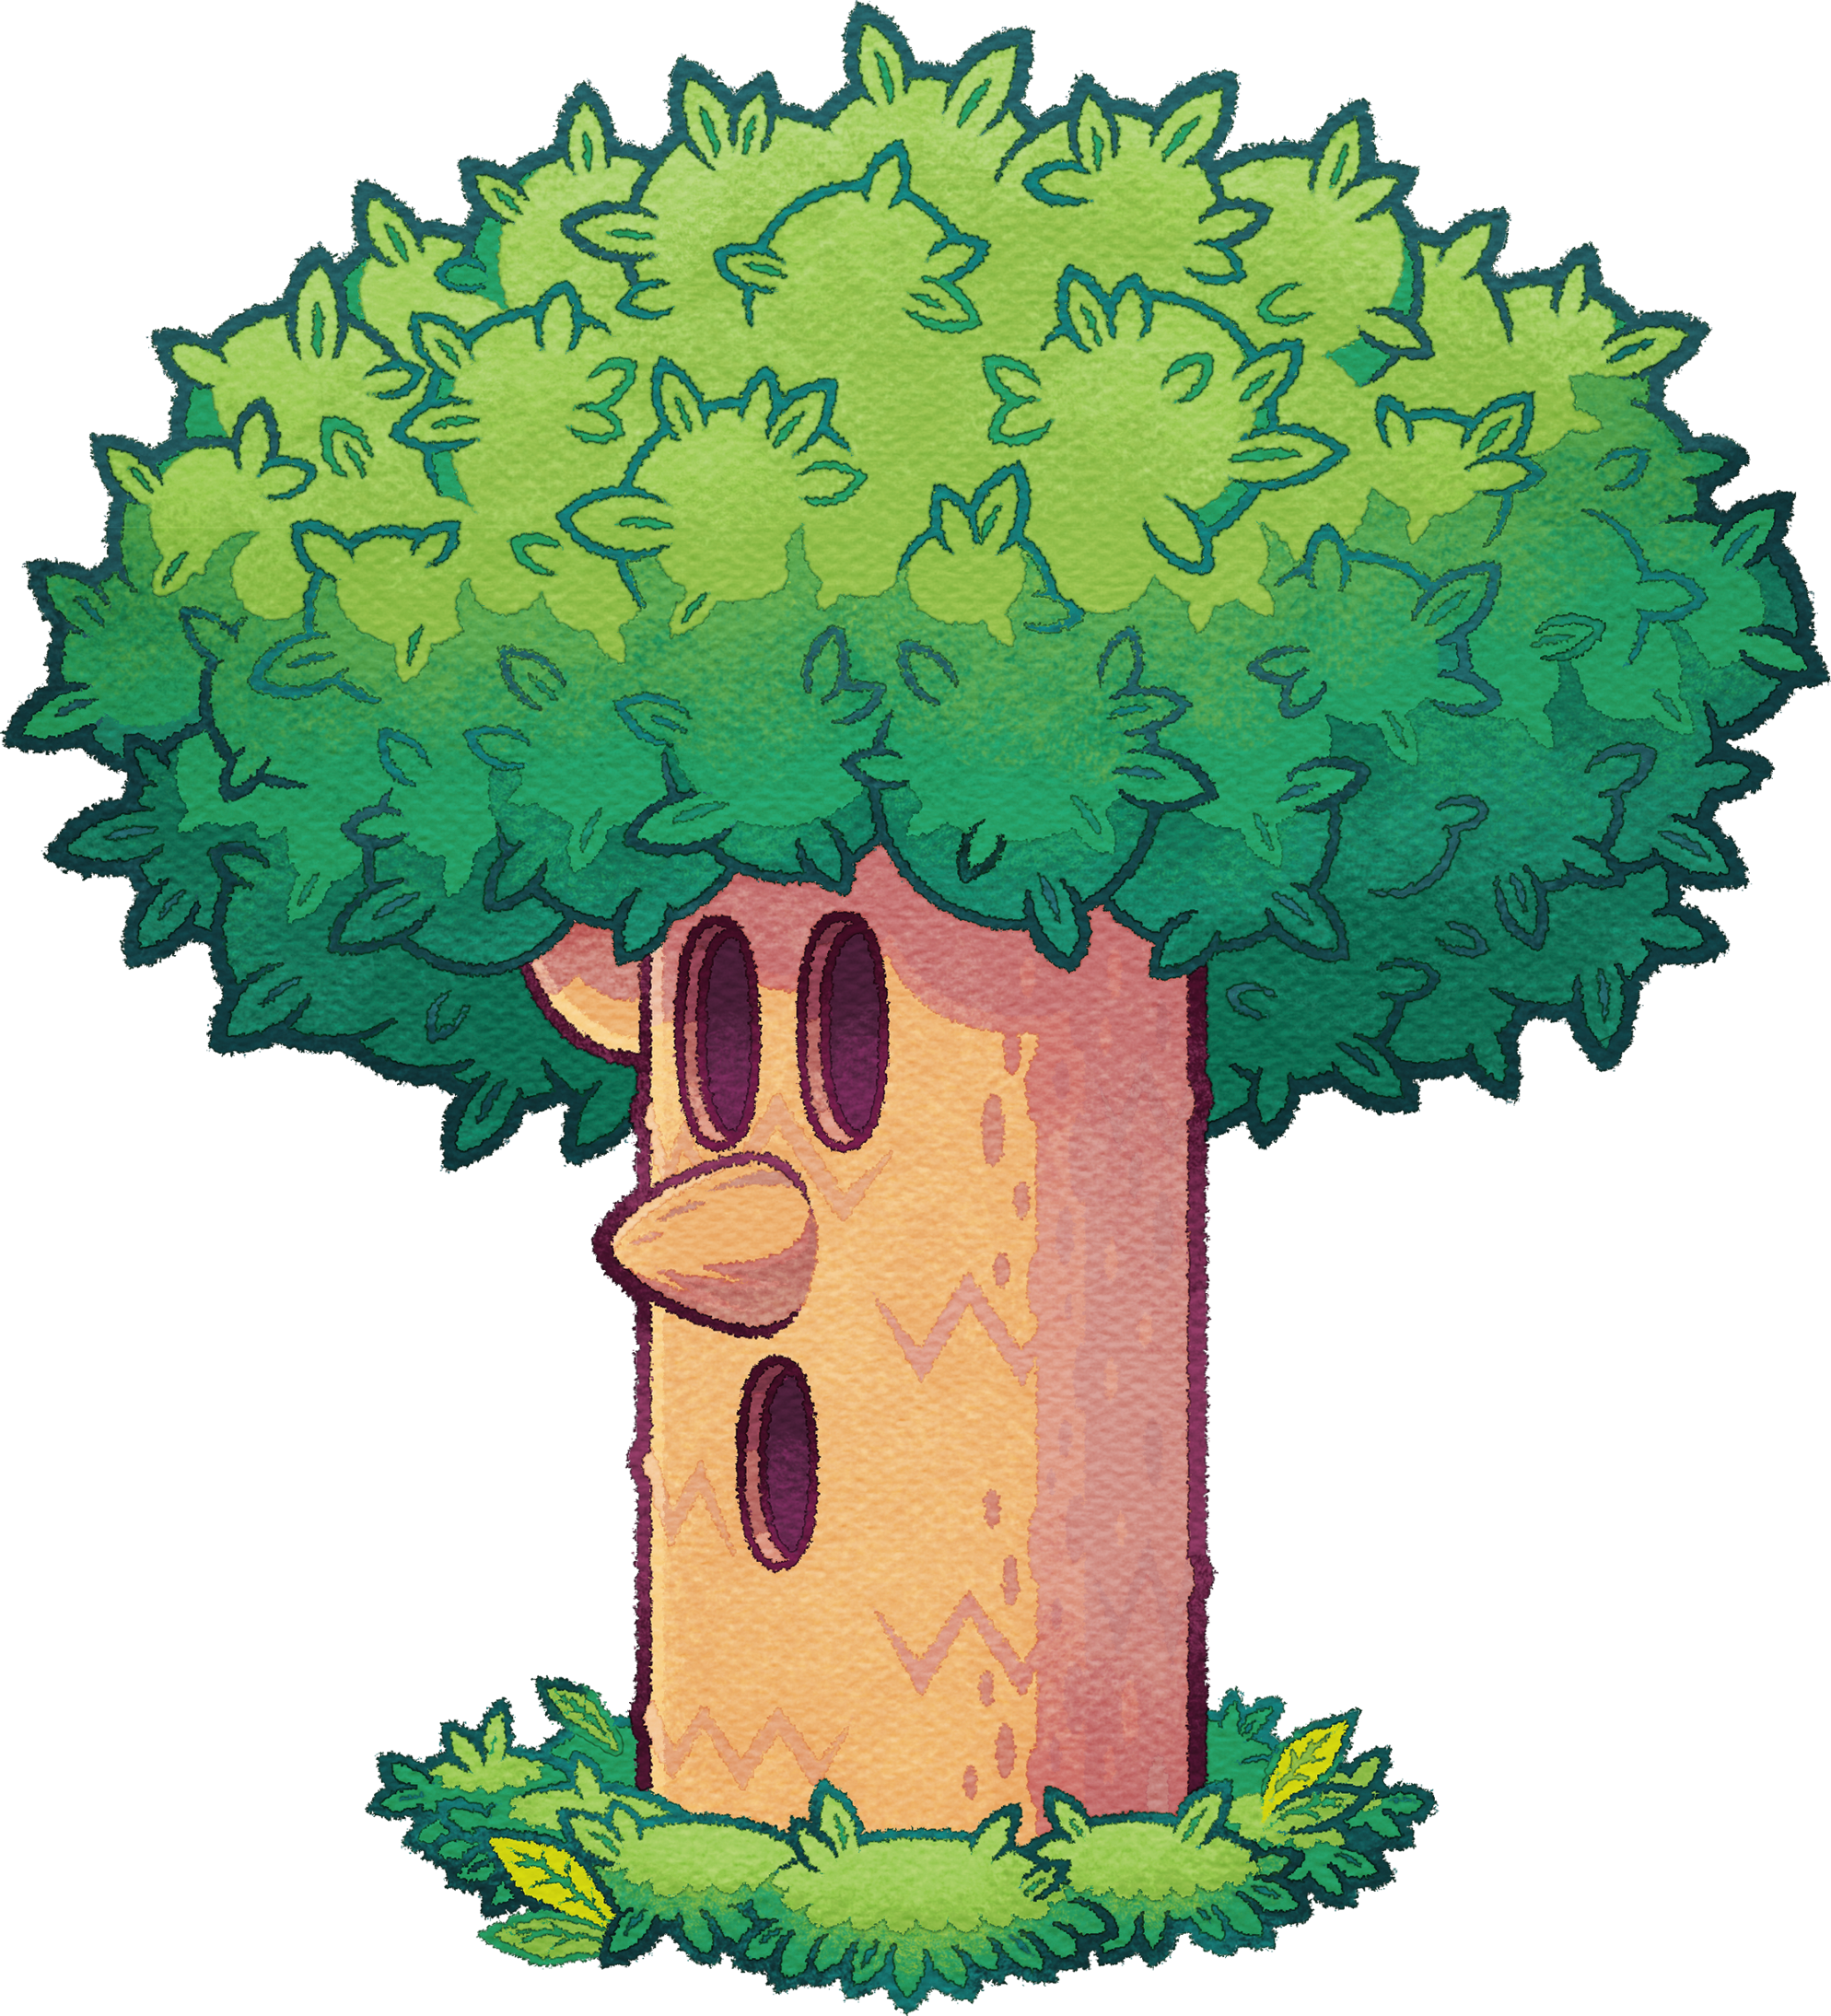 Whispy Woods - WiKirby: it's a wiki, about Kirby!